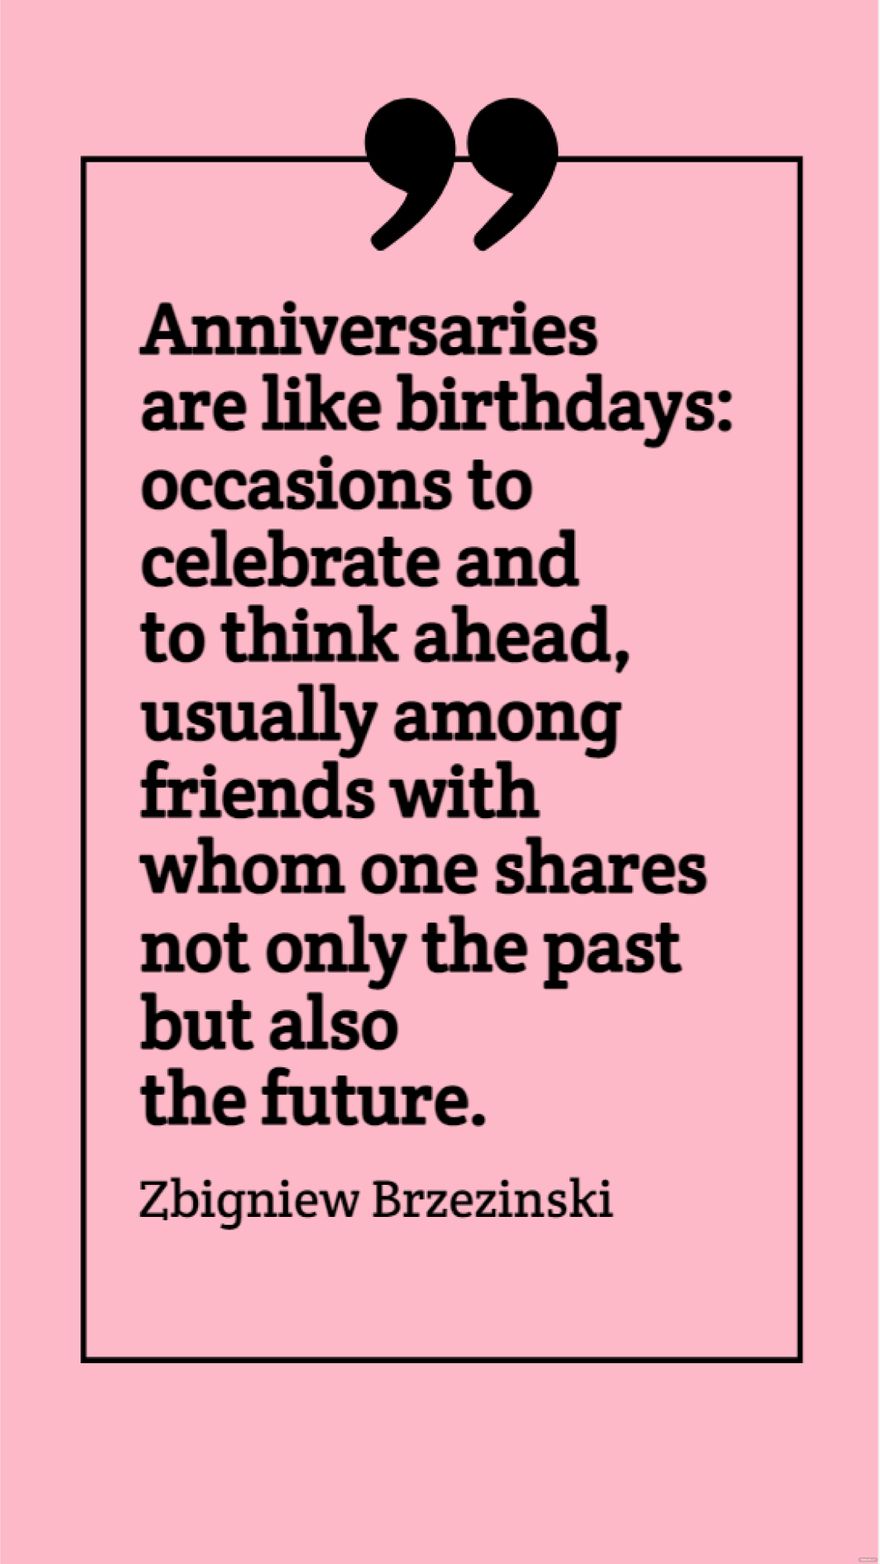 Zbigniew Brzezinski - Anniversaries are like birthdays: occasions to celebrate and to think ahead, usually among friends with whom one shares not only the past but also the future.